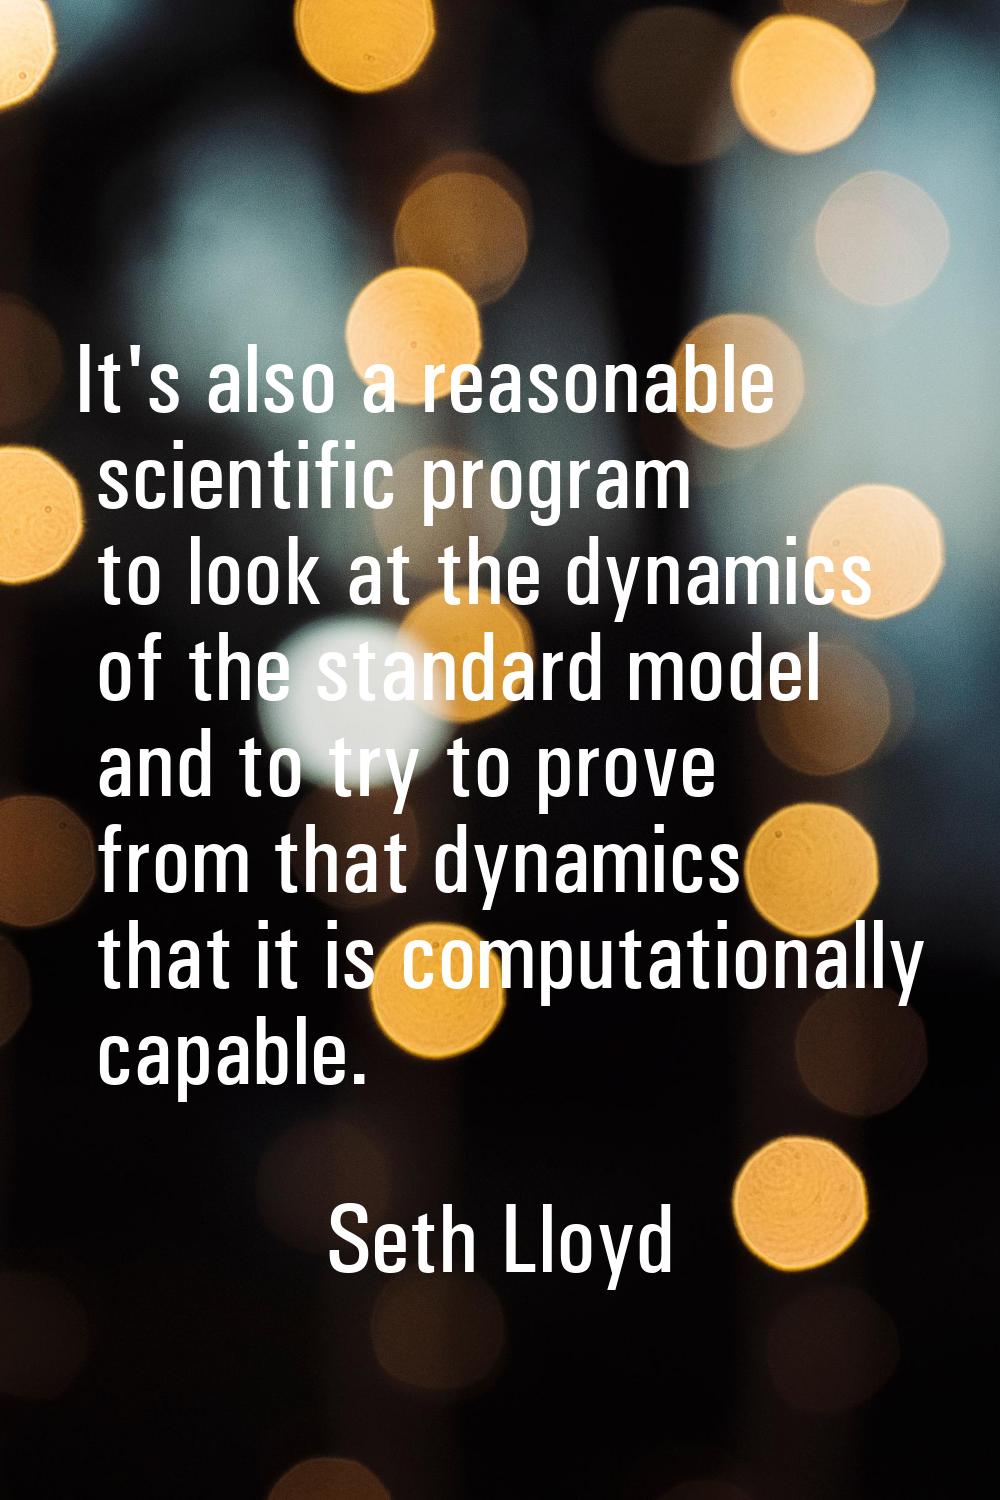 It's also a reasonable scientific program to look at the dynamics of the standard model and to try 